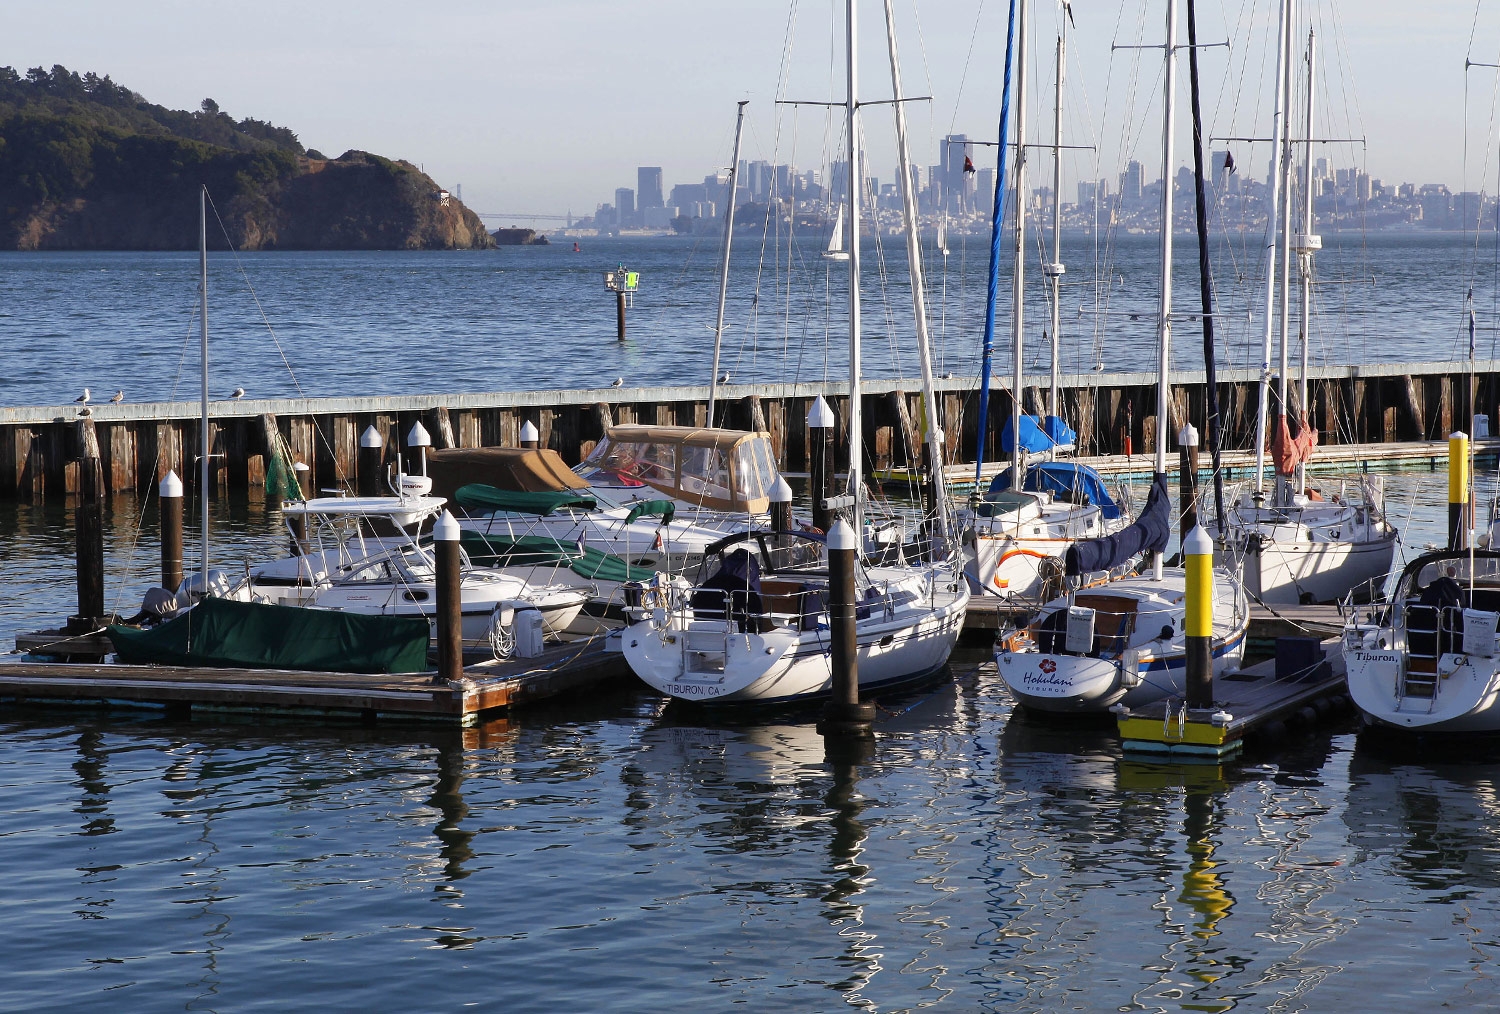 Enjoy views of the sailboats and San Francisco from Waters Edge Hotel in Tiburon California